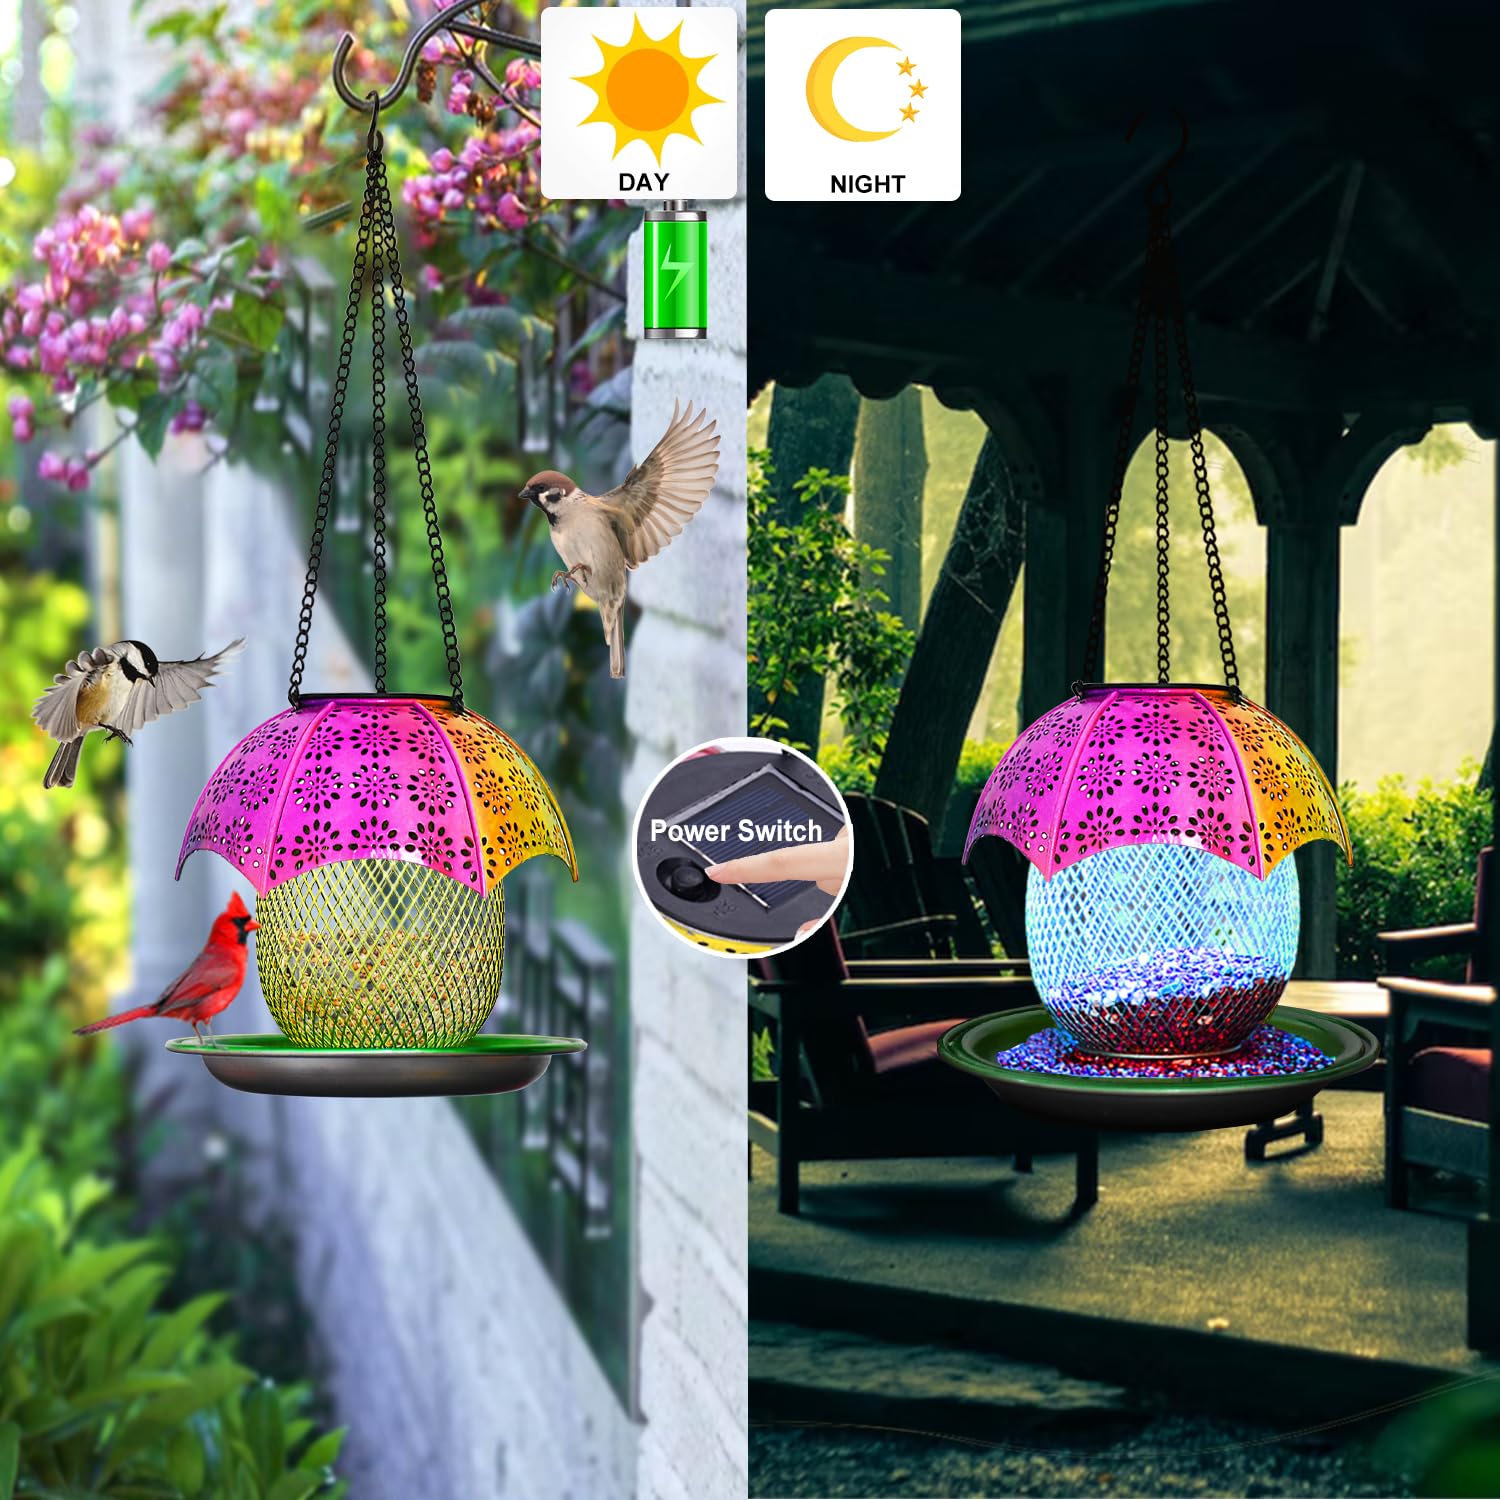 2023 New Solar Bird Feeders - Outdoors Hanging with Automatic Color Changing LED Lights, Metal Wild Bird Feeders Provides 2.5LBs Capacity, Hanging Bird Feeder Makes an Ideal Gifts for Bird Lovers.